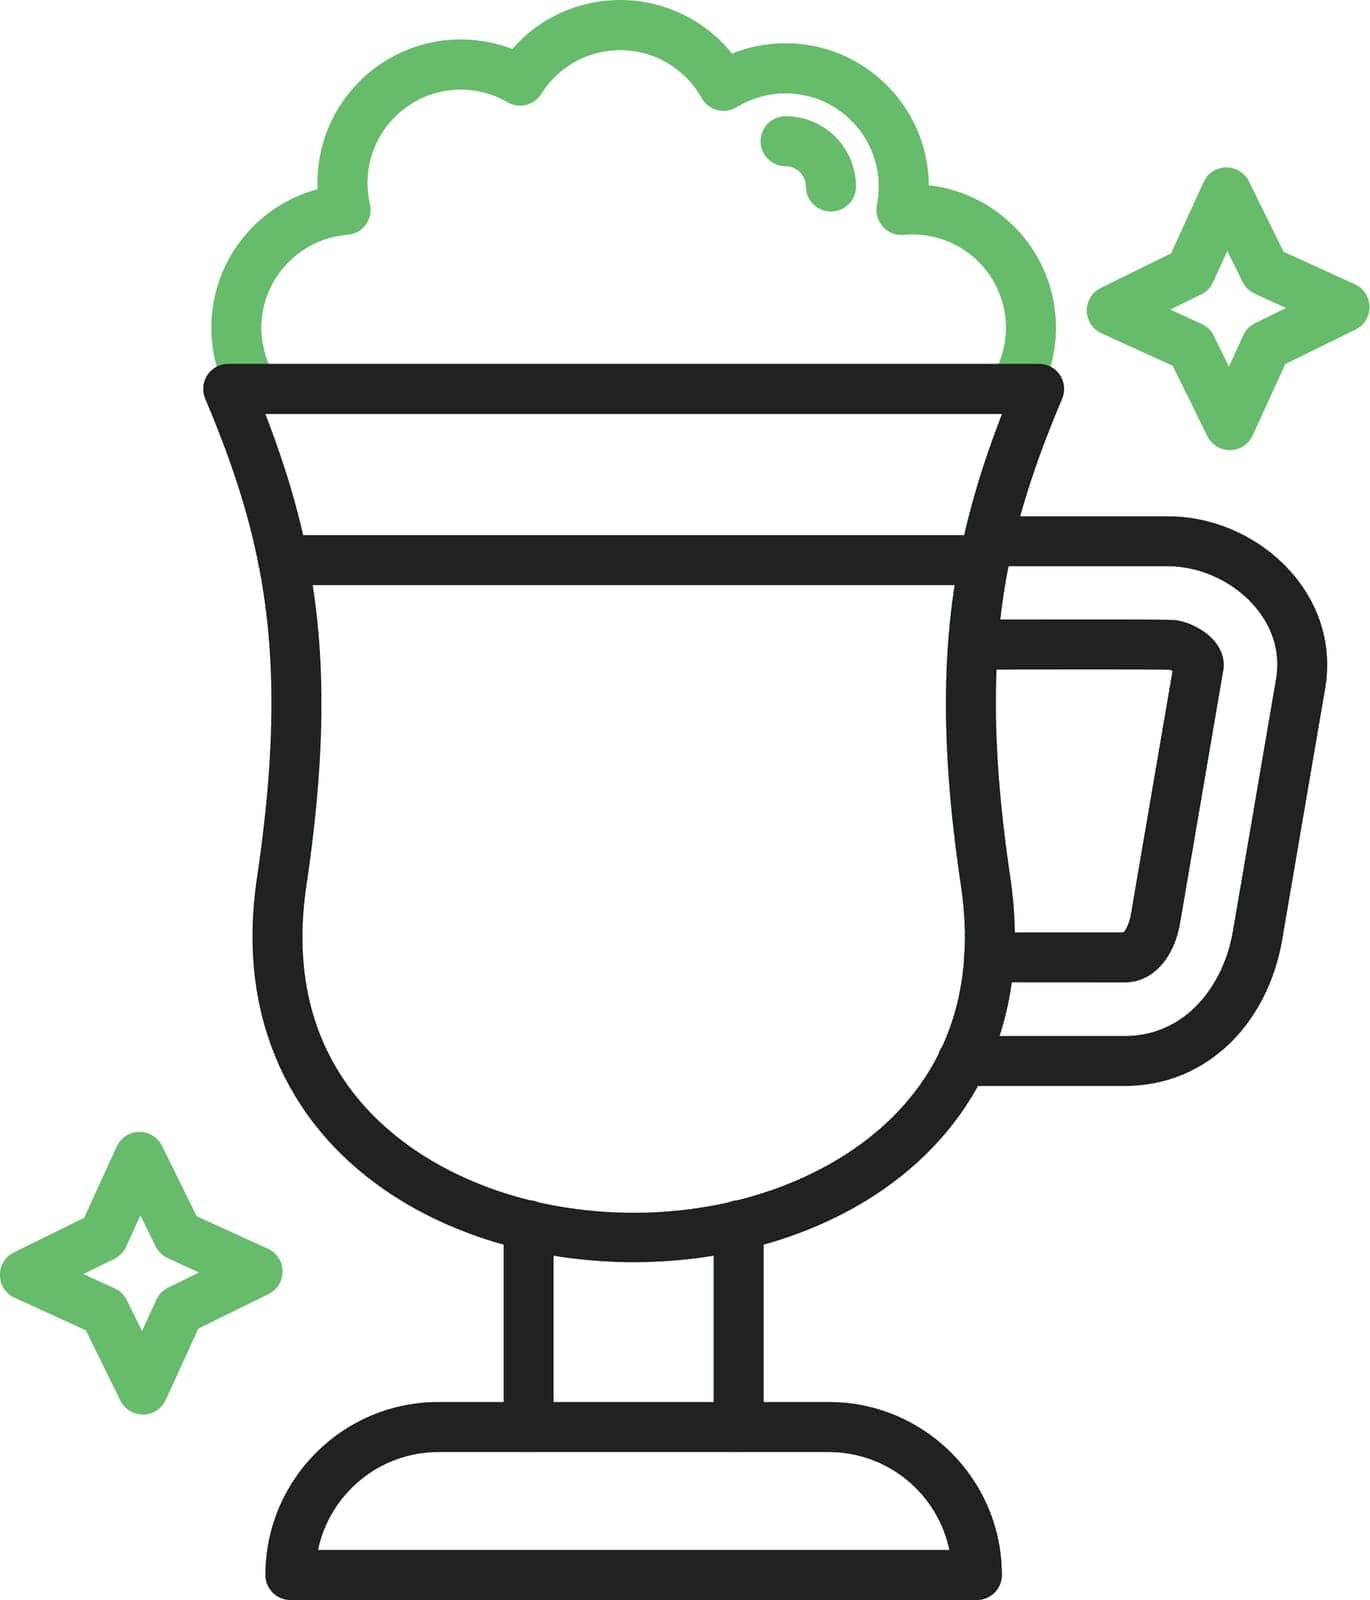 Coffee Icon Image. by ICONBUNNY